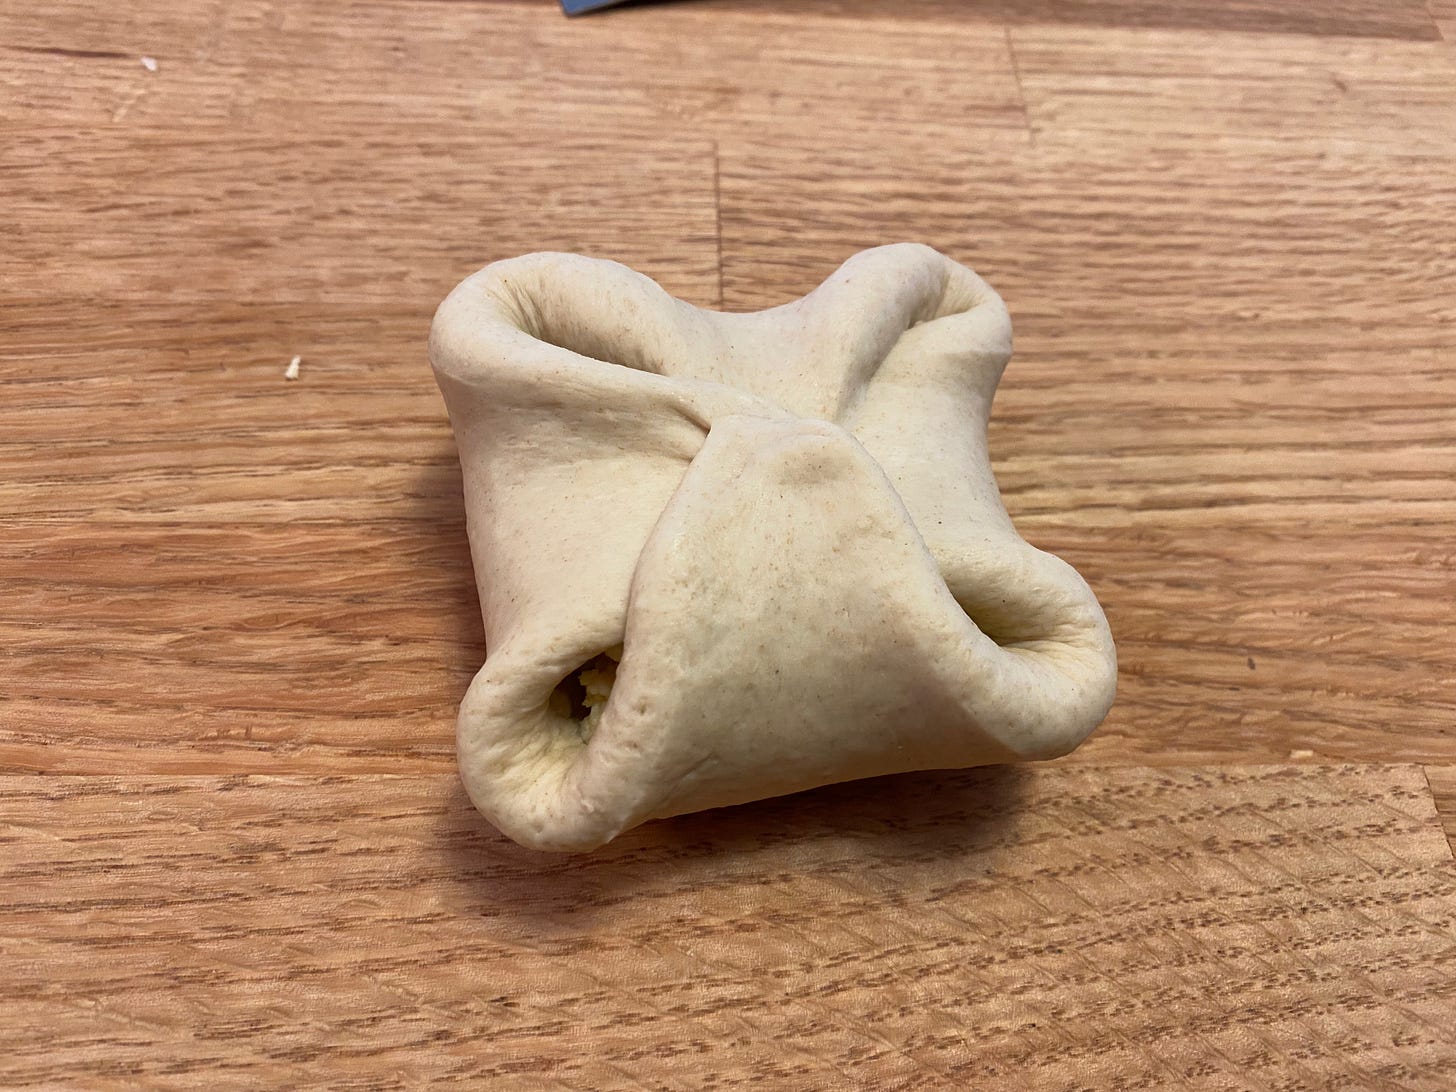 The four sides of the dough have now been folded up and in, to make a shape like a four leaf clover. There are still gaps at the four corners where the dough doesn’t quite meet.